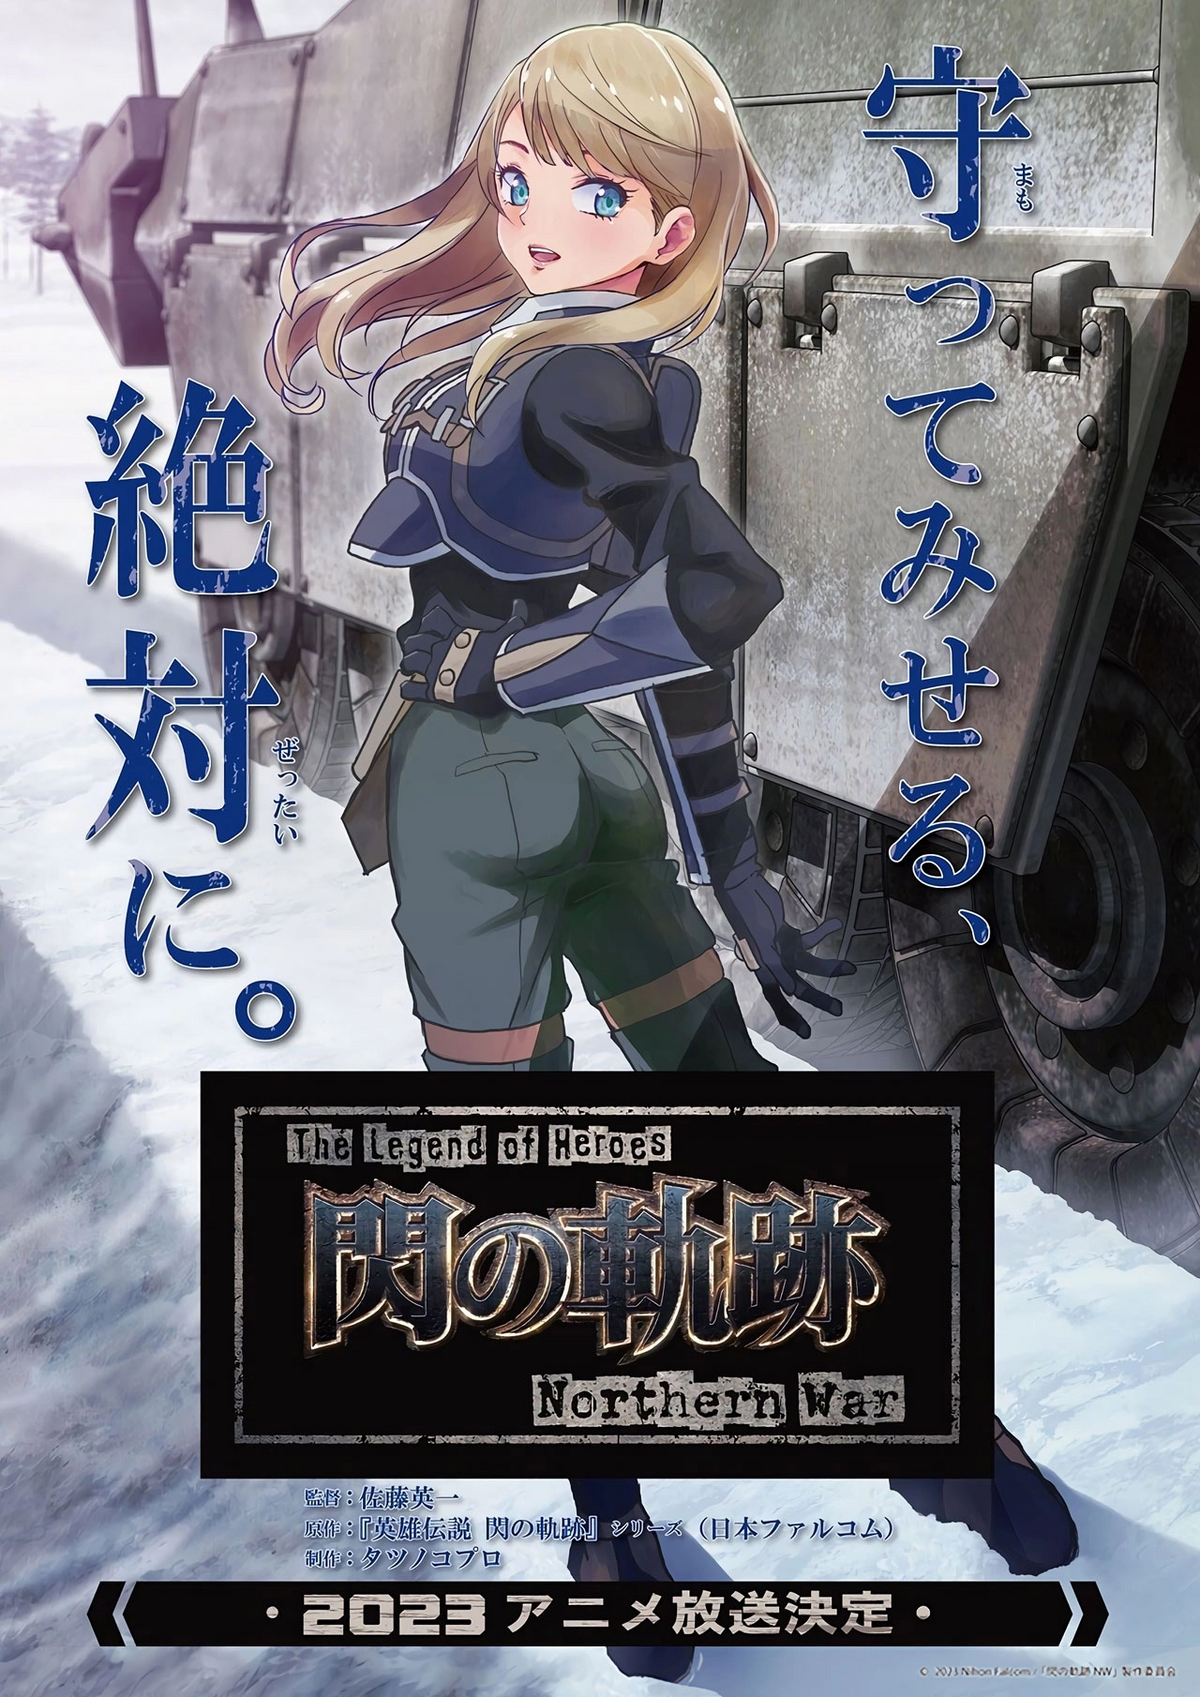 The Legend of Heroes: Trails of Cold Steel Manga | Anime-Planet